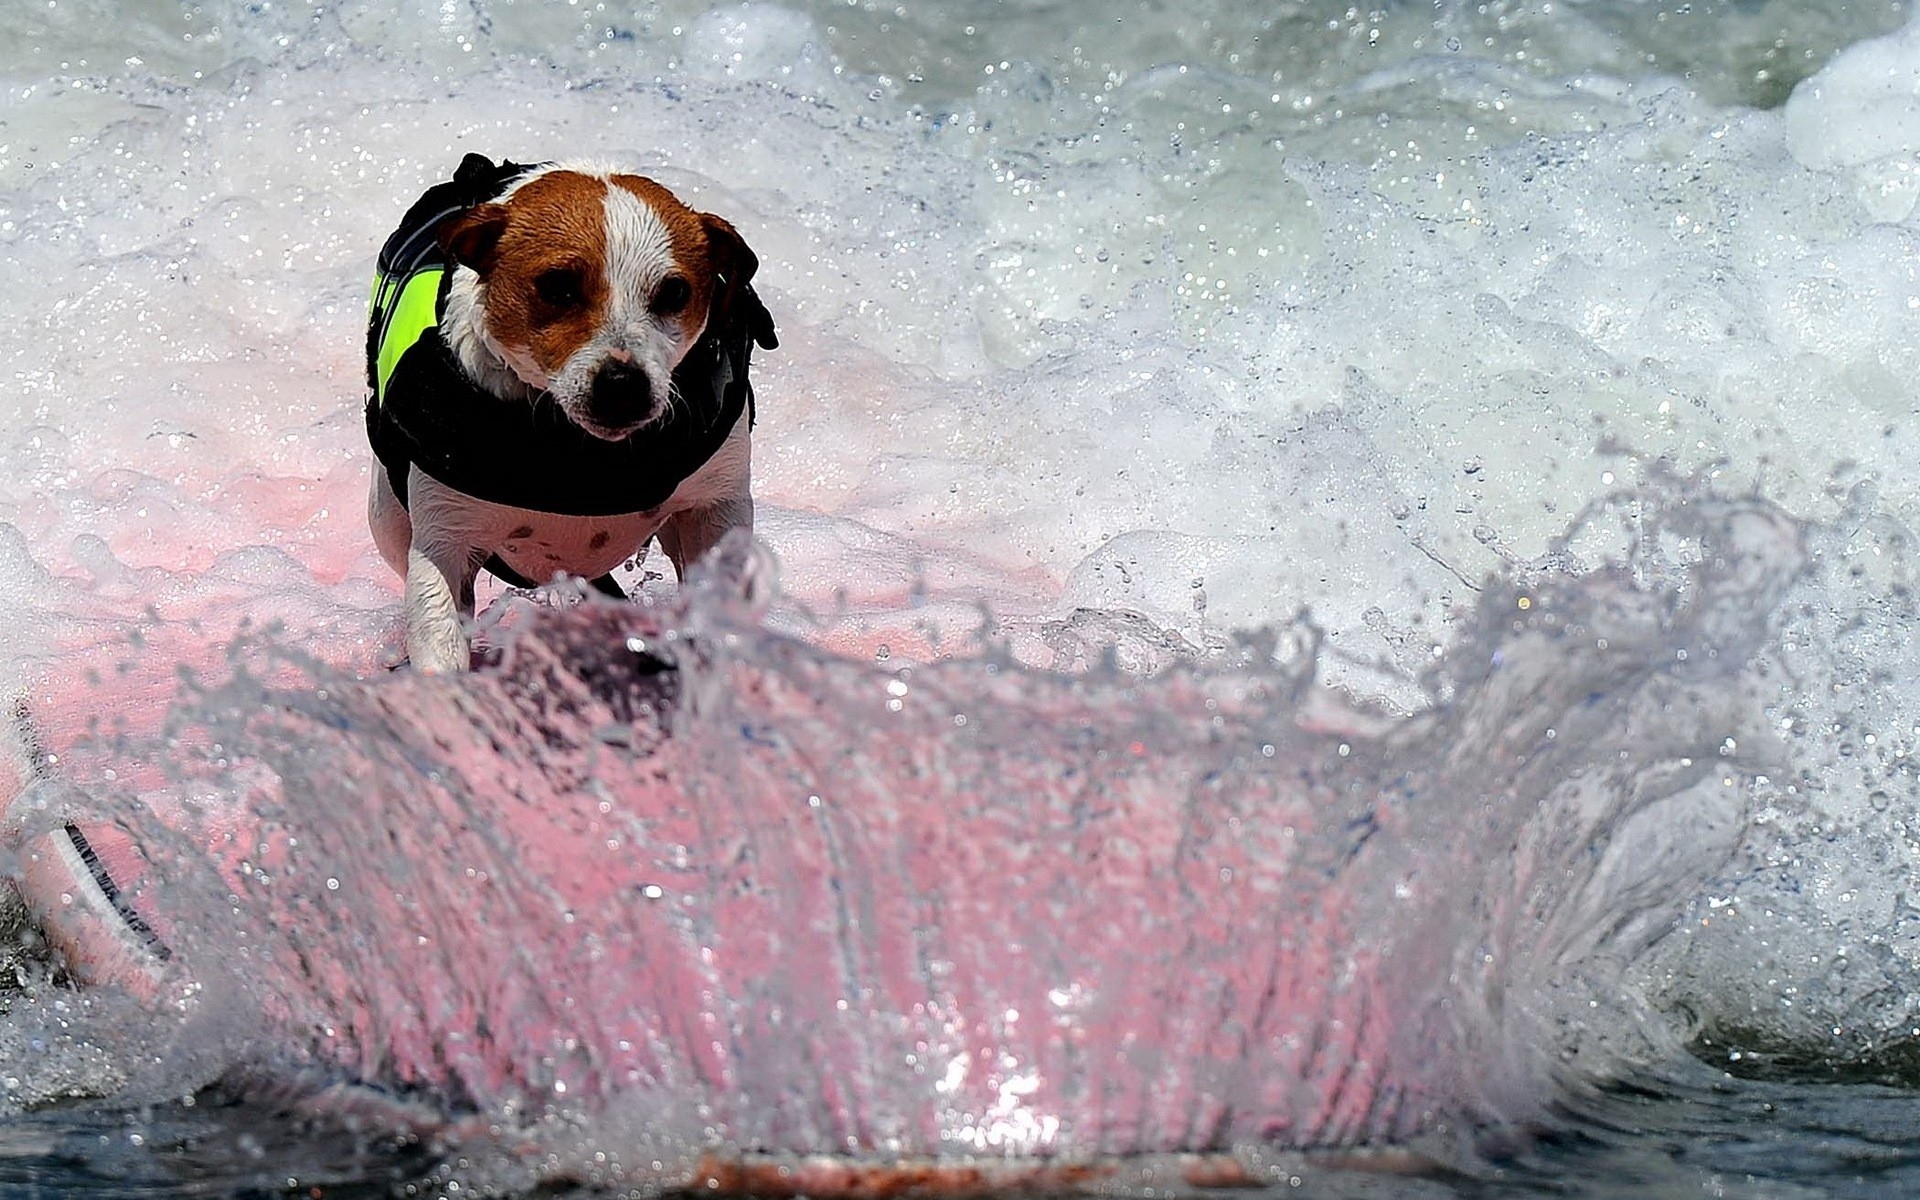 animals, Dogs, Canines, Humor, Funny, Situations, Sports, Surfing, Waves, Ocean, Sea, Bubbles, Foam, Sparkle, Drops Wallpaper